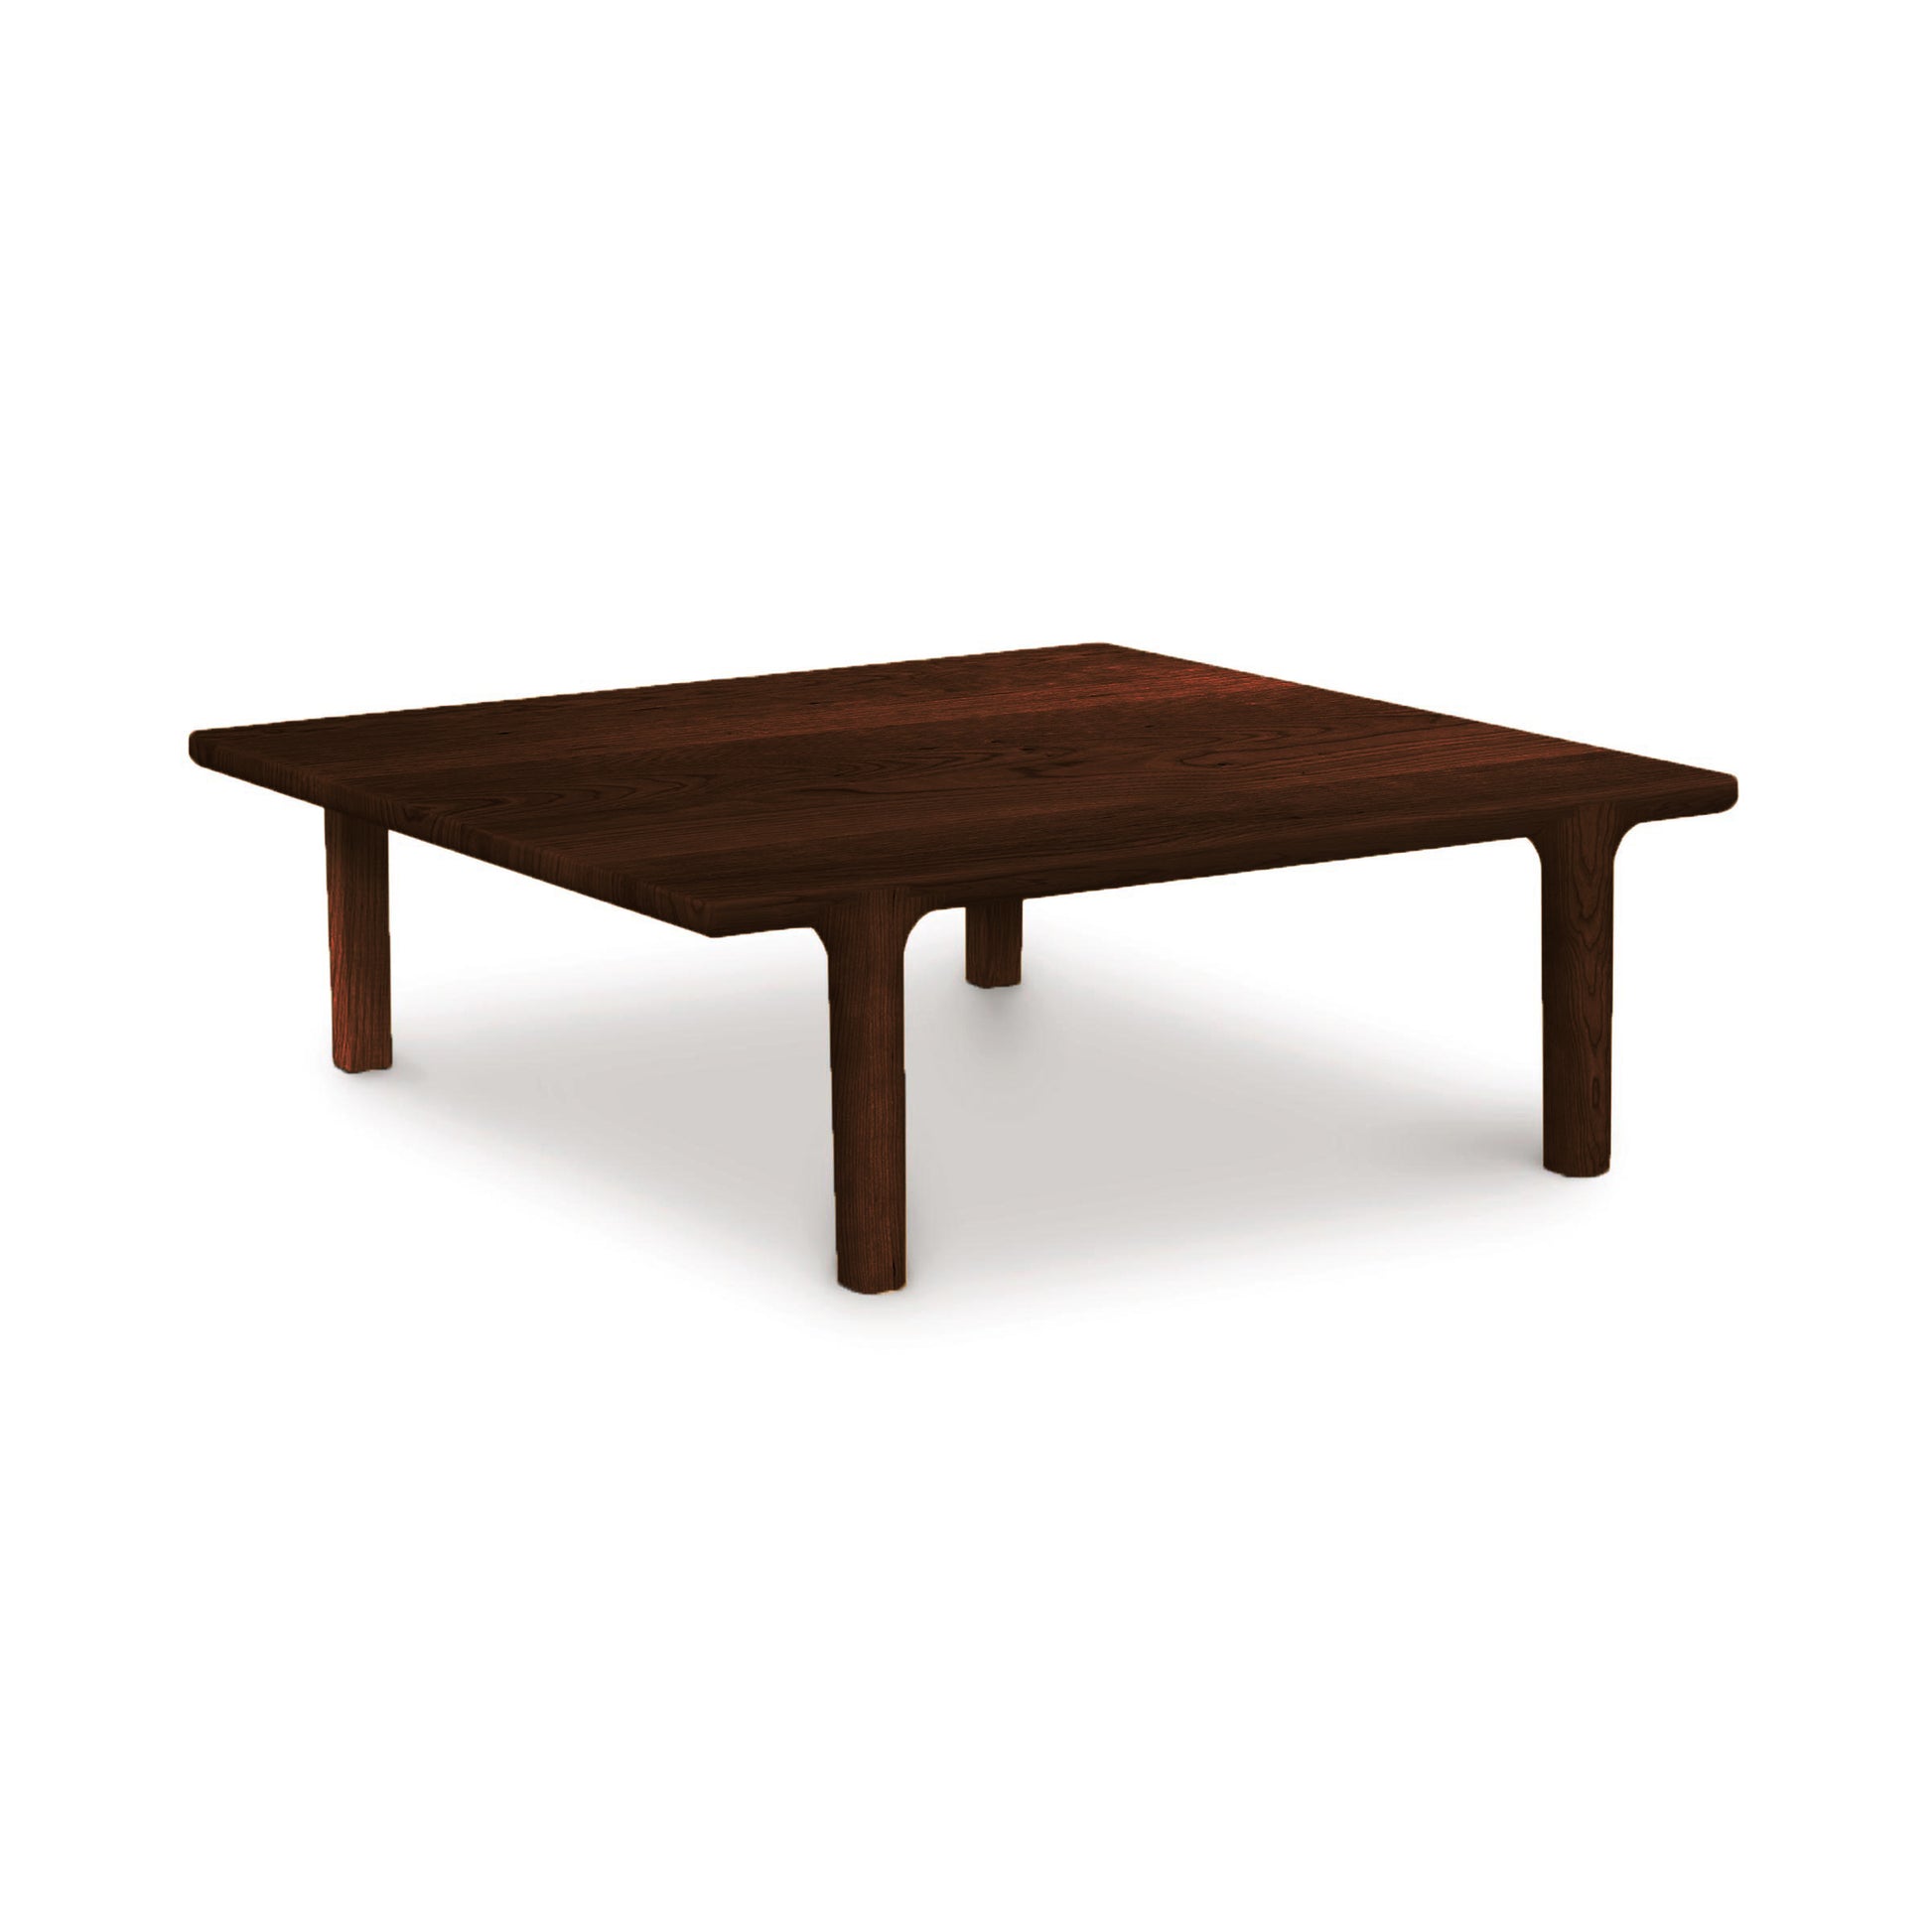 A simple, low-profile Copeland Furniture Sierra Square Coffee Table crafted from North American hardwood, displayed on a white background.